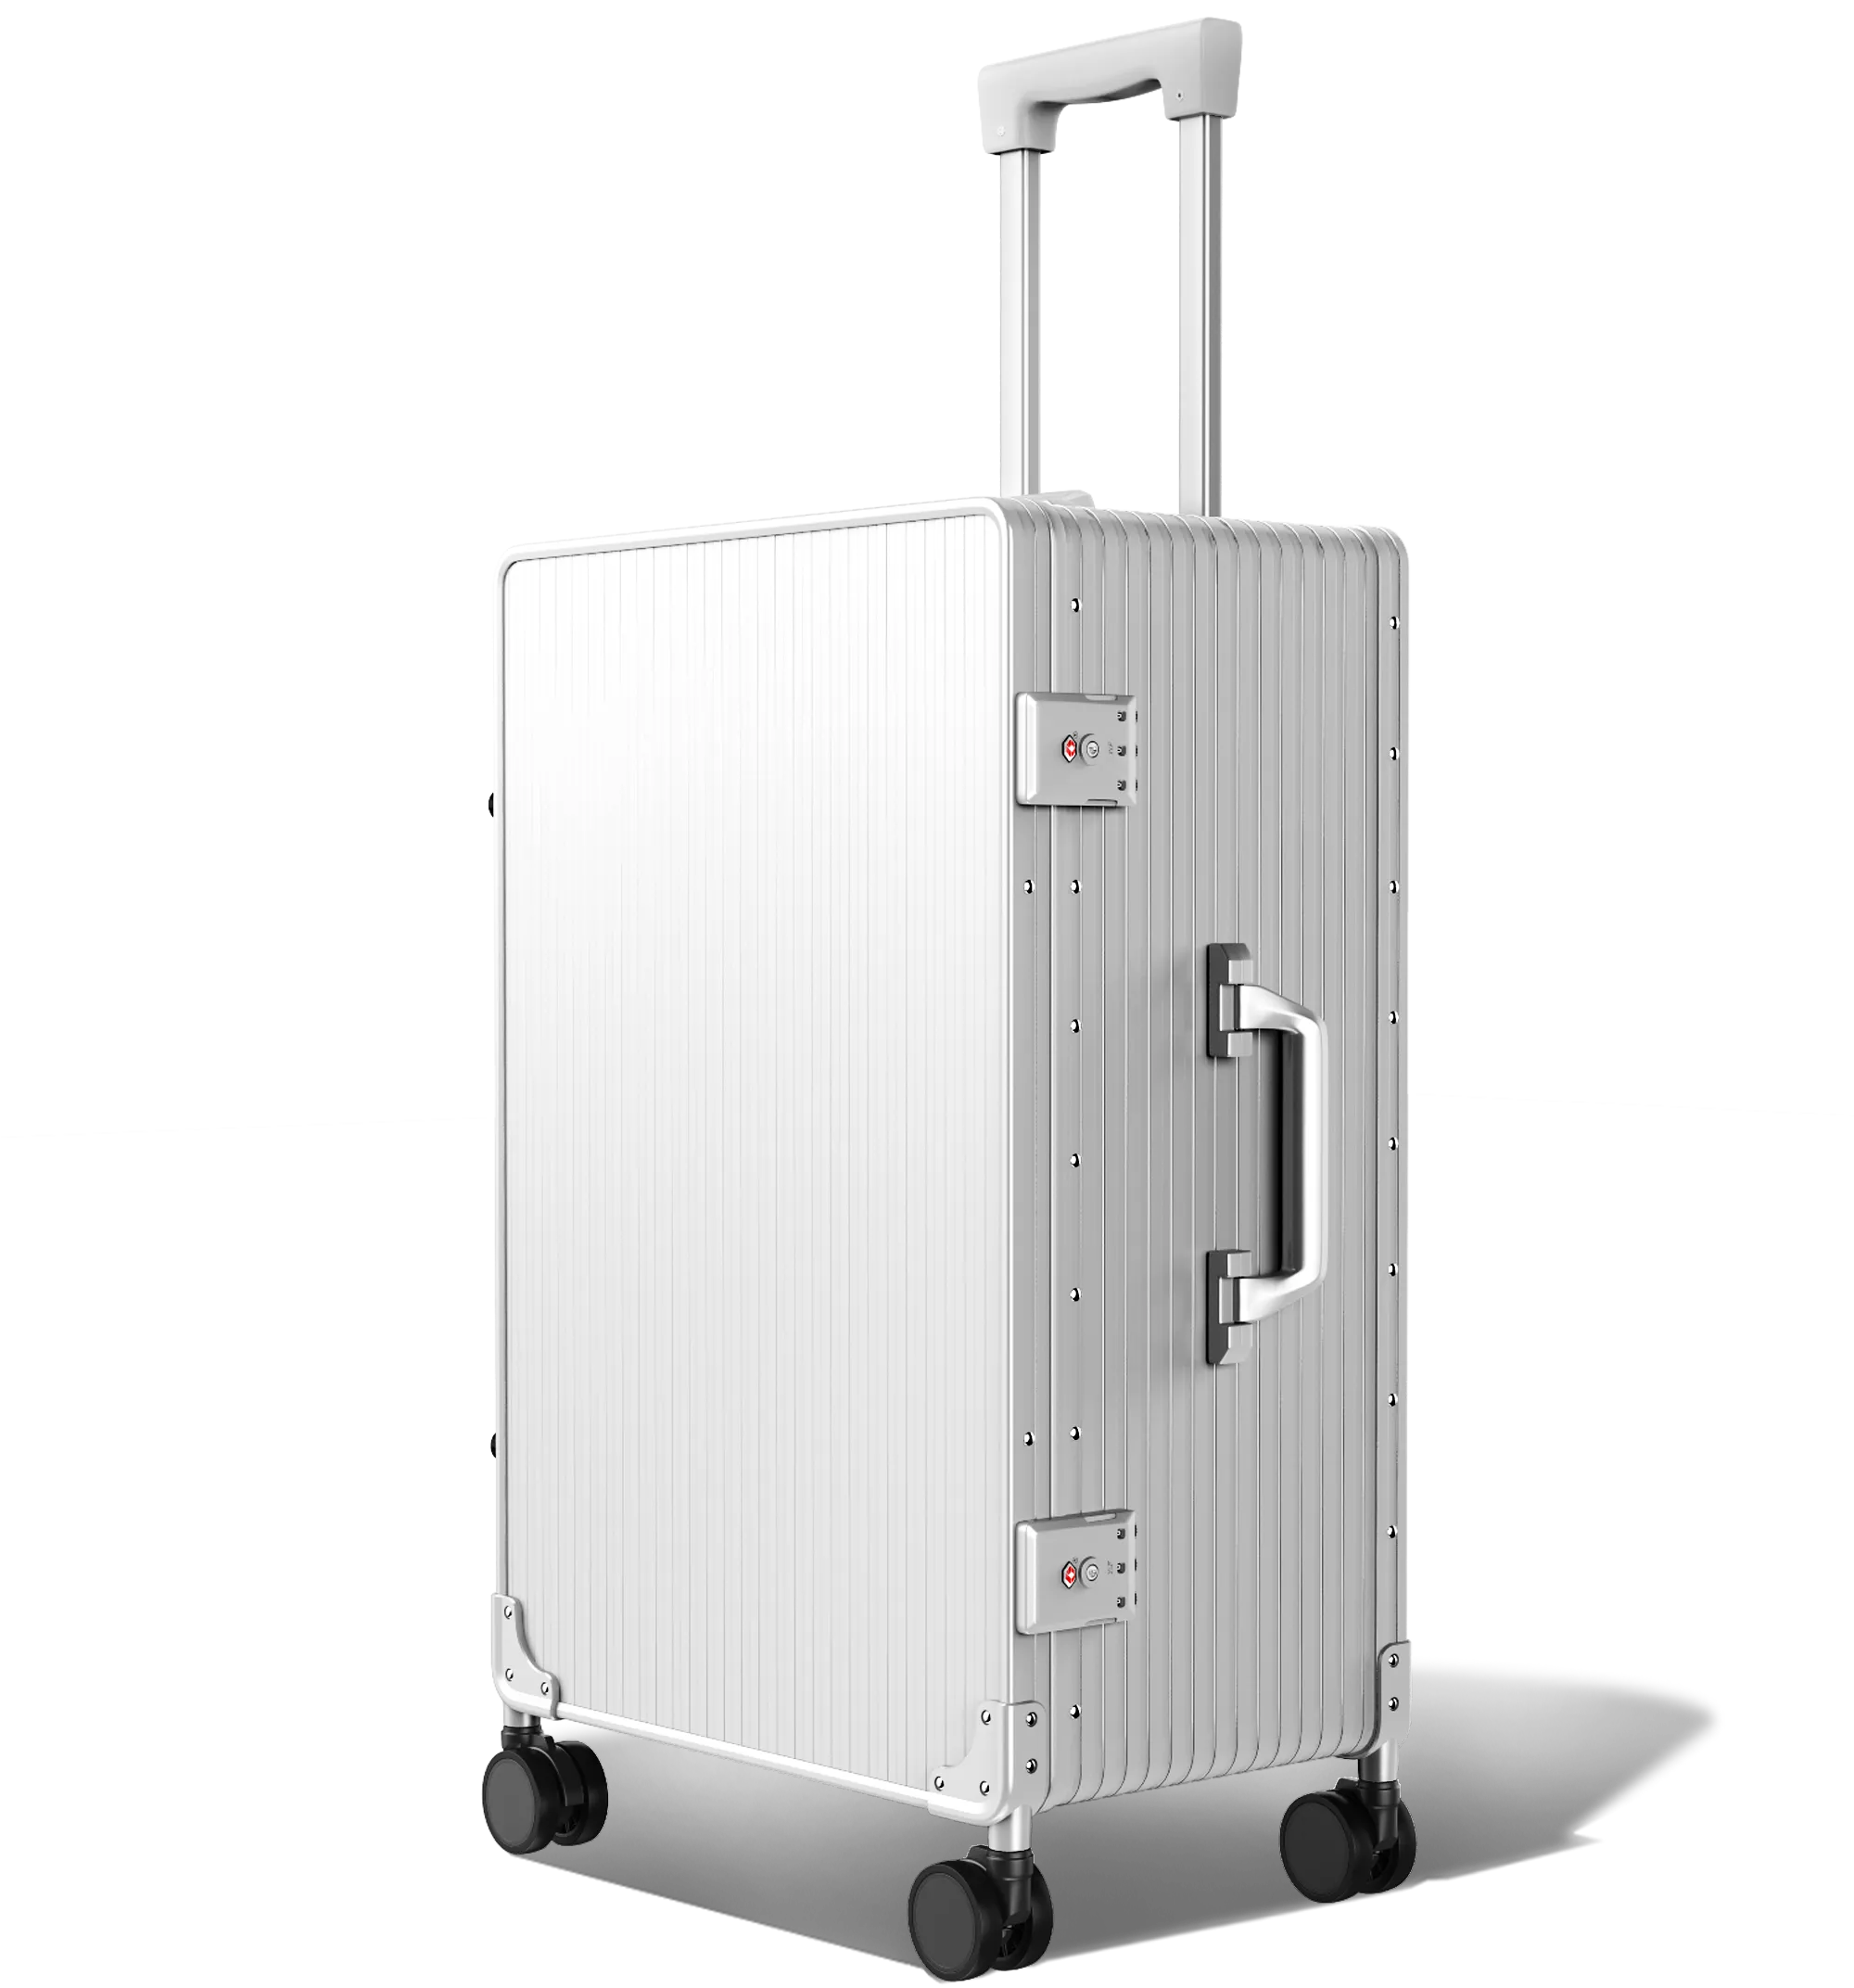 A three-quarter view of an upright Check-In 65/25 Silver hard-shell aluminium Luggage with a textured surface, featuring an extended telescopic handle, a side handle, and four spinner wheels, set against a white background.